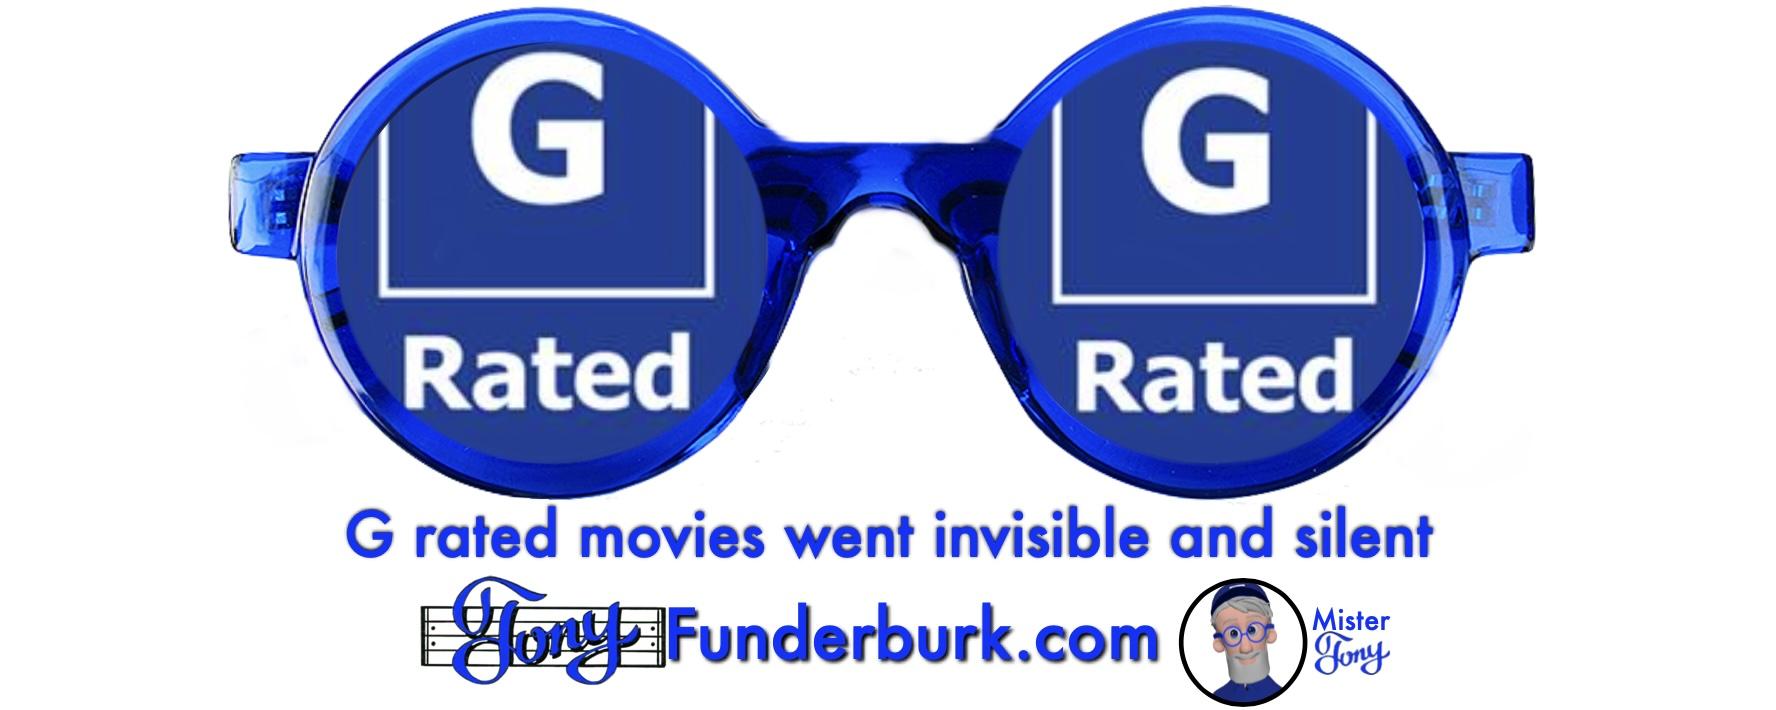 G rated movies went invisible and silent